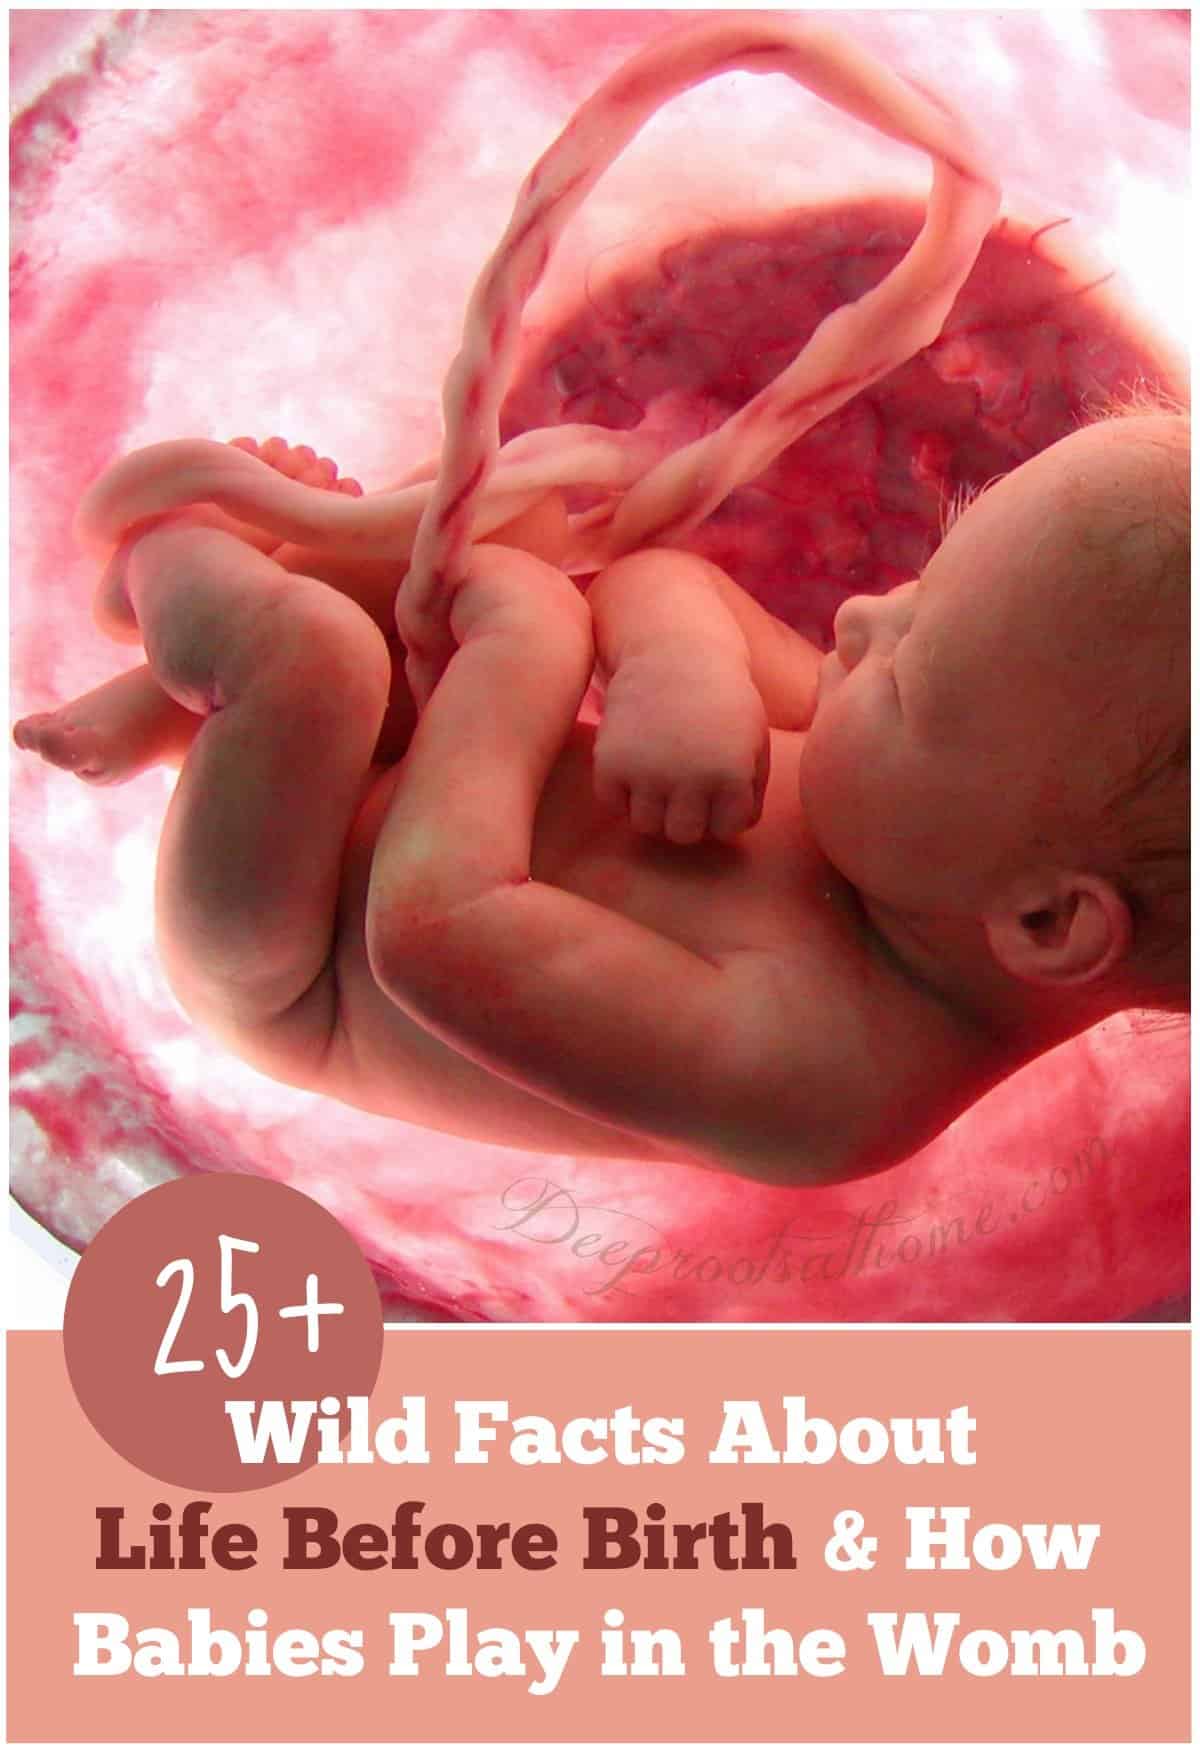 25+ Wild Facts About Life Before Birth & How Babies Play in the Womb. Pinterest image